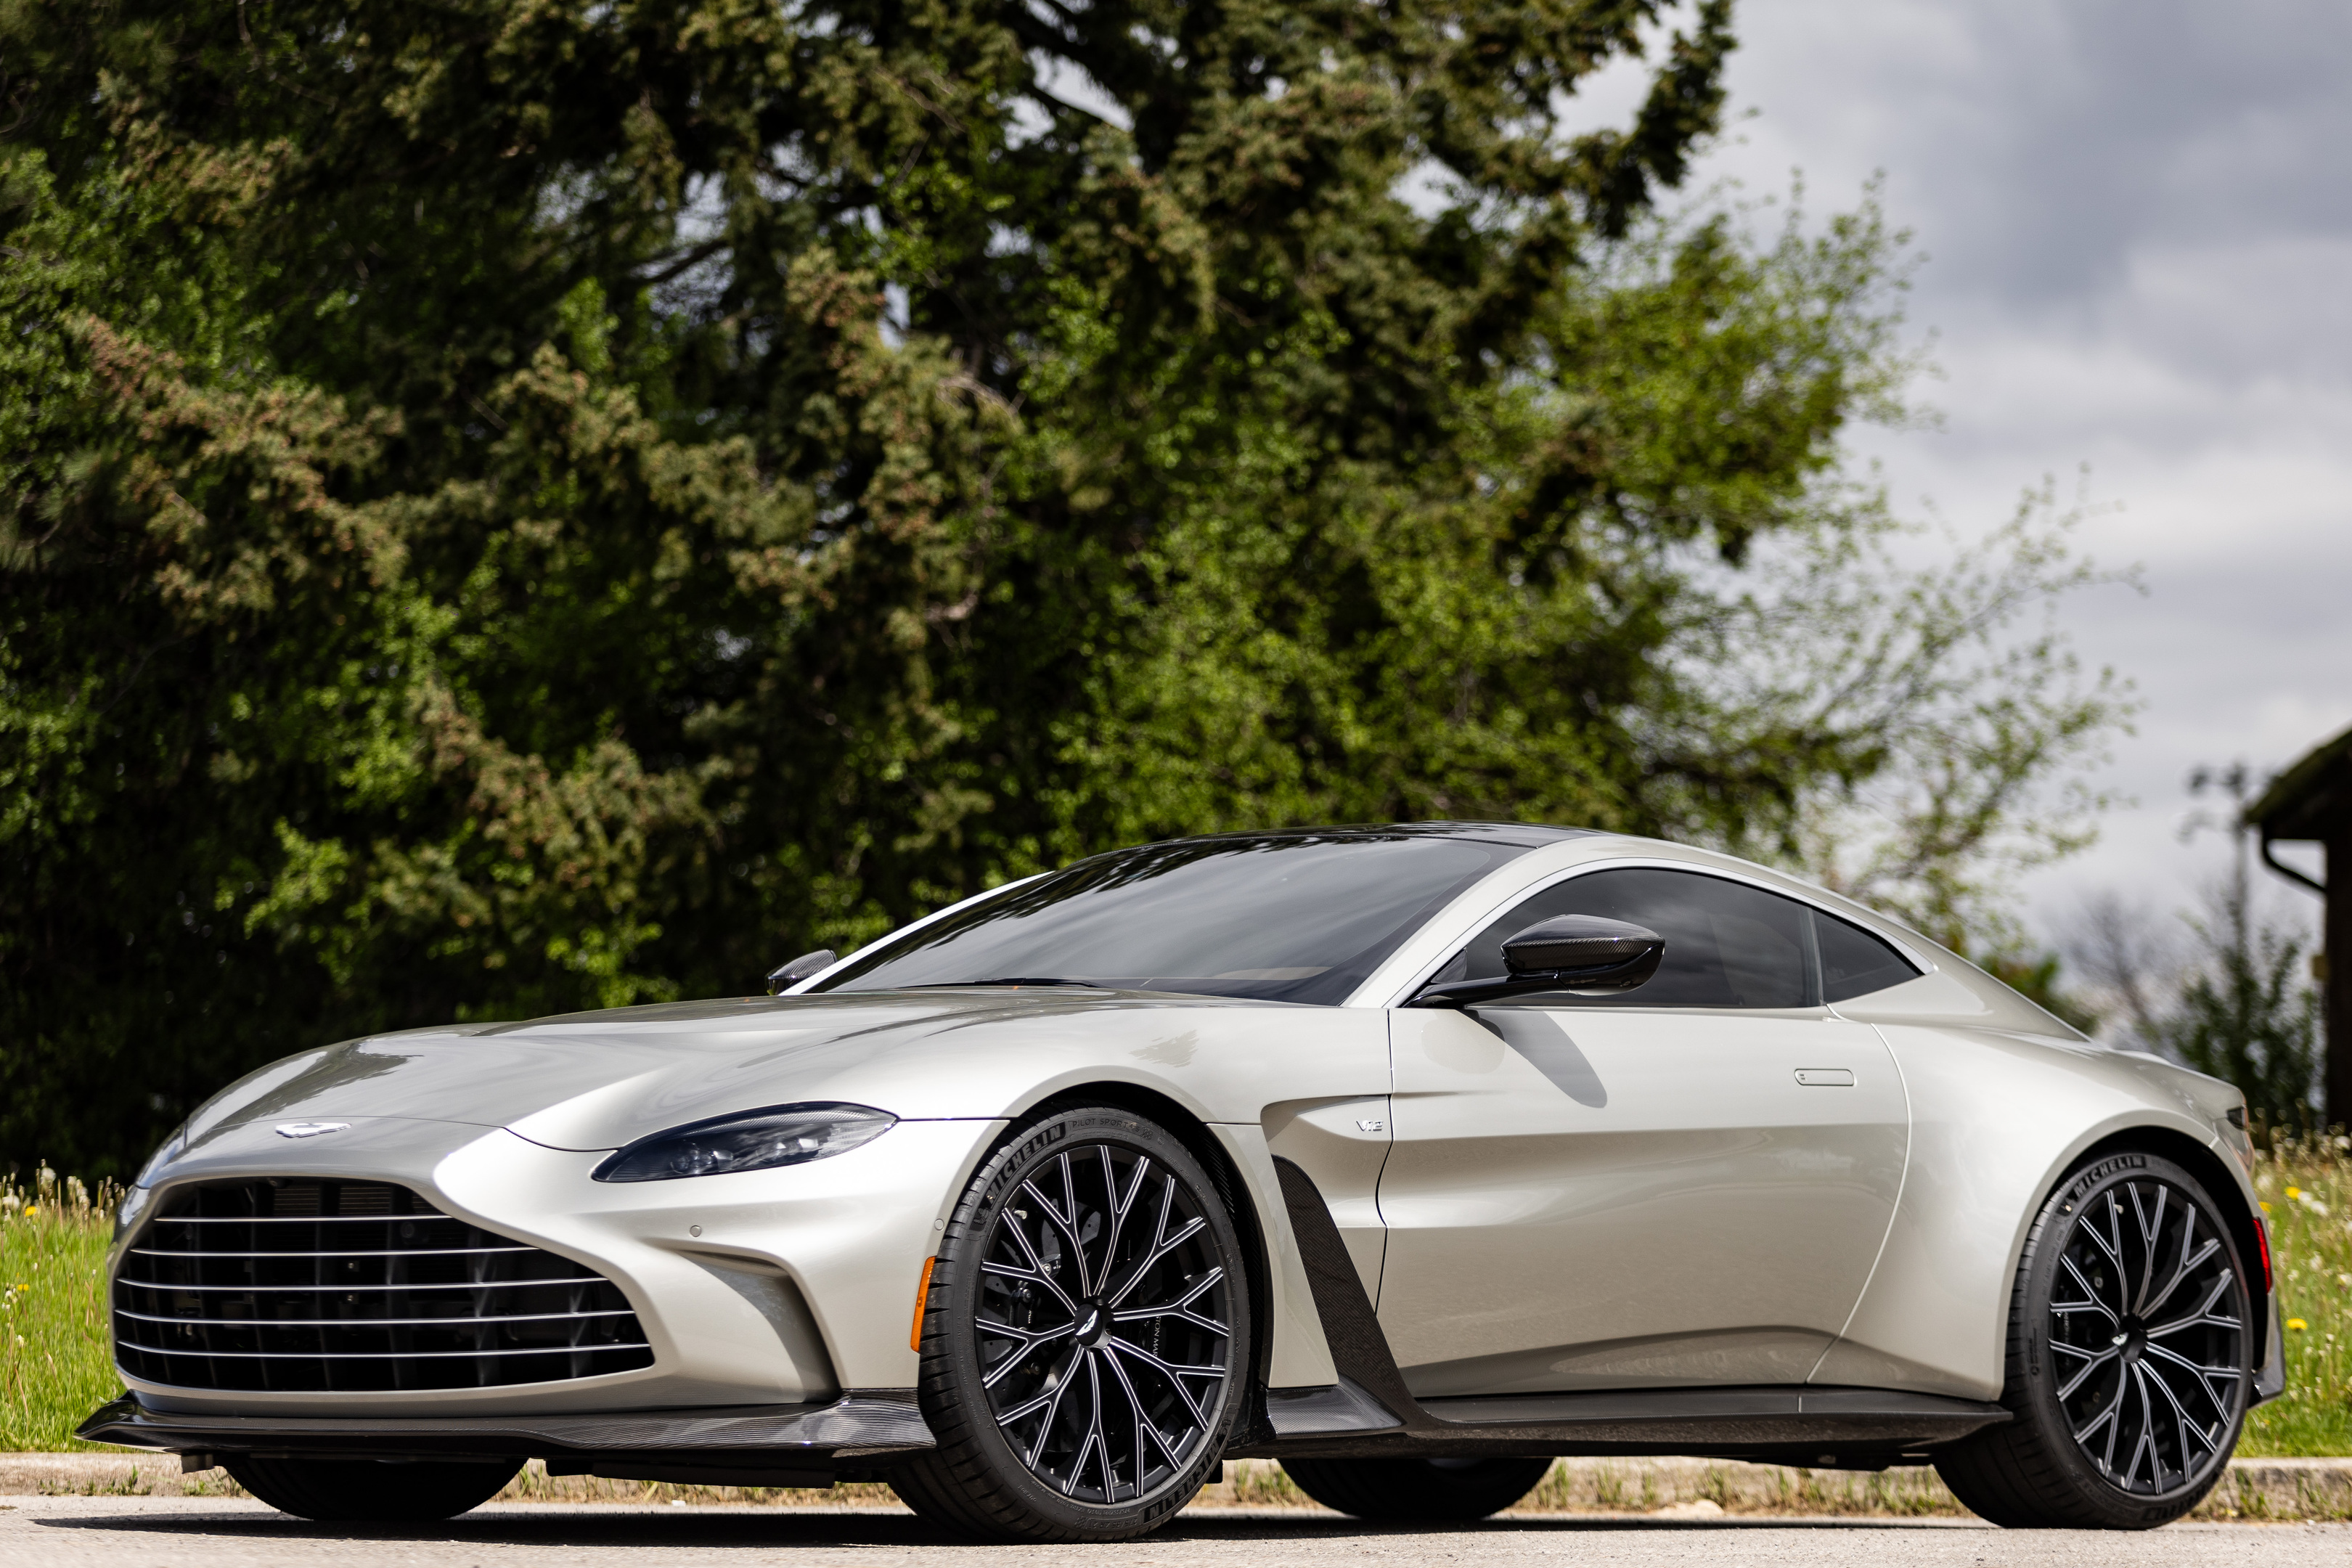 2023 Aston Martin Vantage V12 Coupe, 2,636 kms, $78k in options, 1 of 6